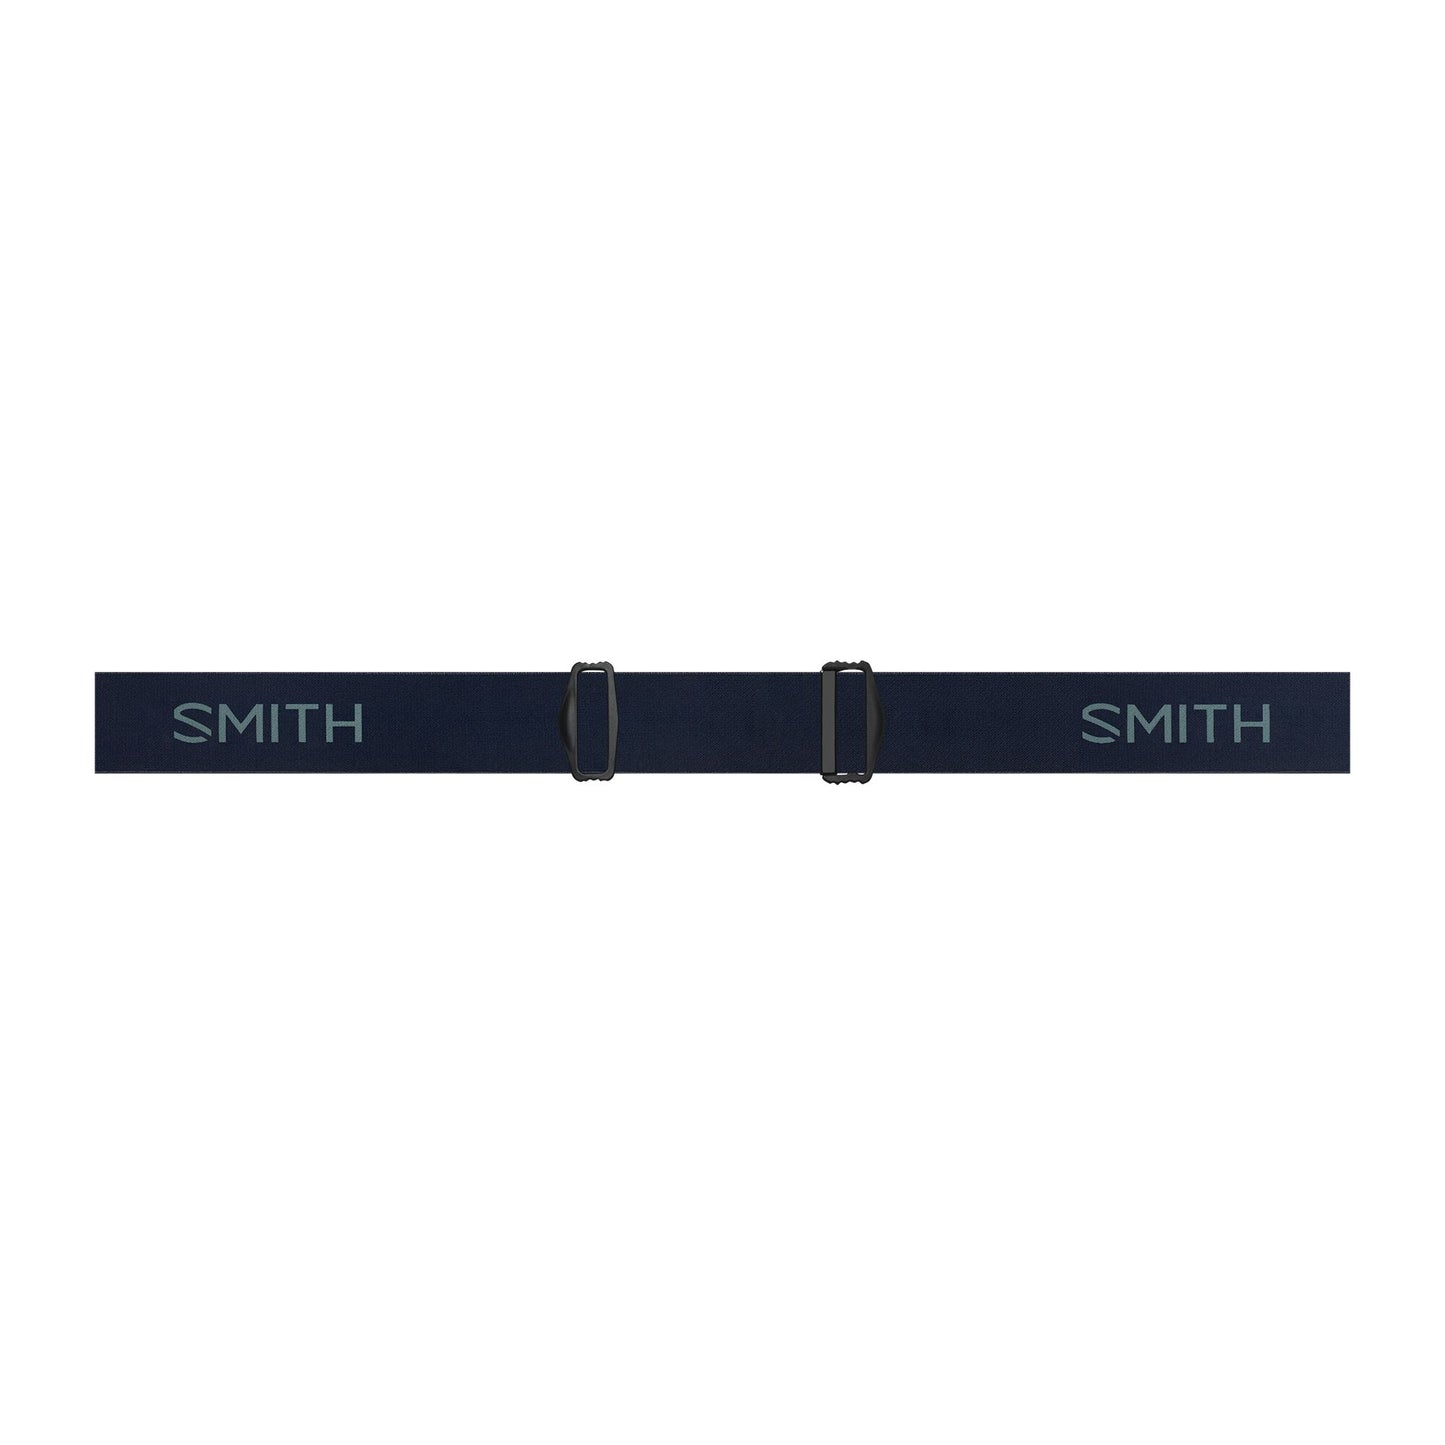 Smith Loam Goggles - One Size Fits Most - Midnight Navy - Contrast Rose Flash AF Lens